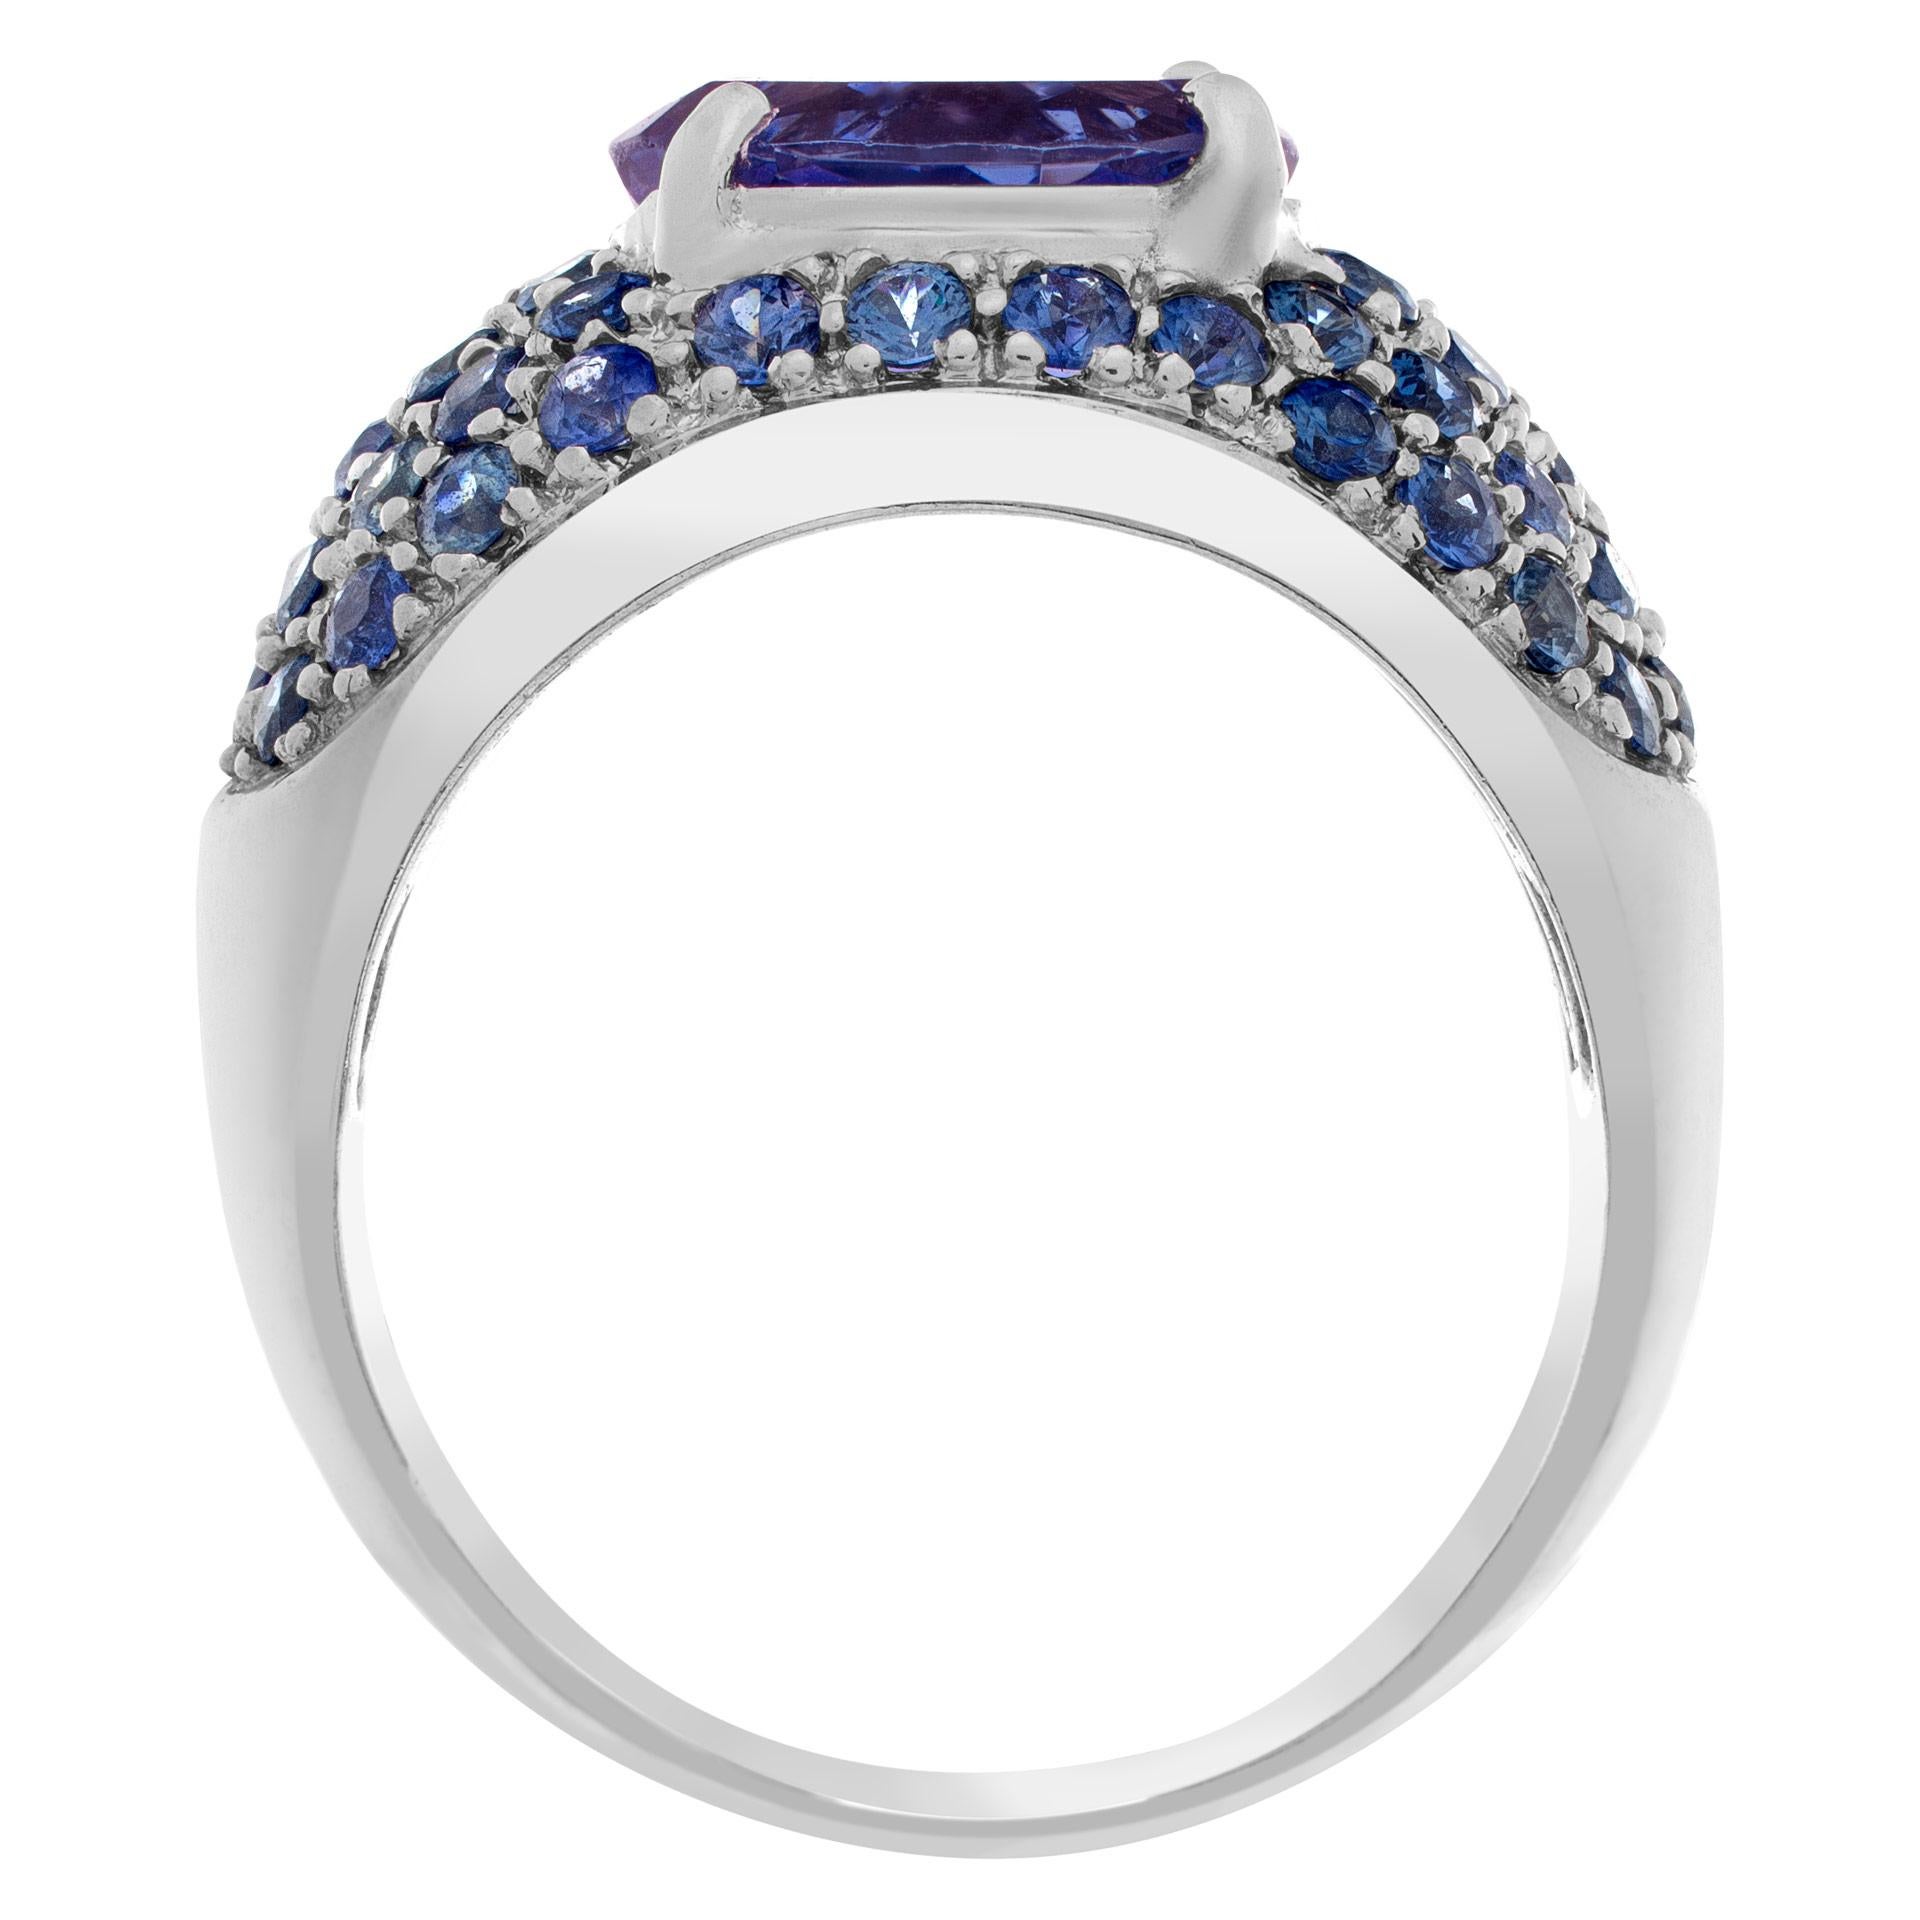 Women's Bright Oval Center 'Approximately 2 Carats' Tanzanite Surrounded by Sparkling Pa For Sale